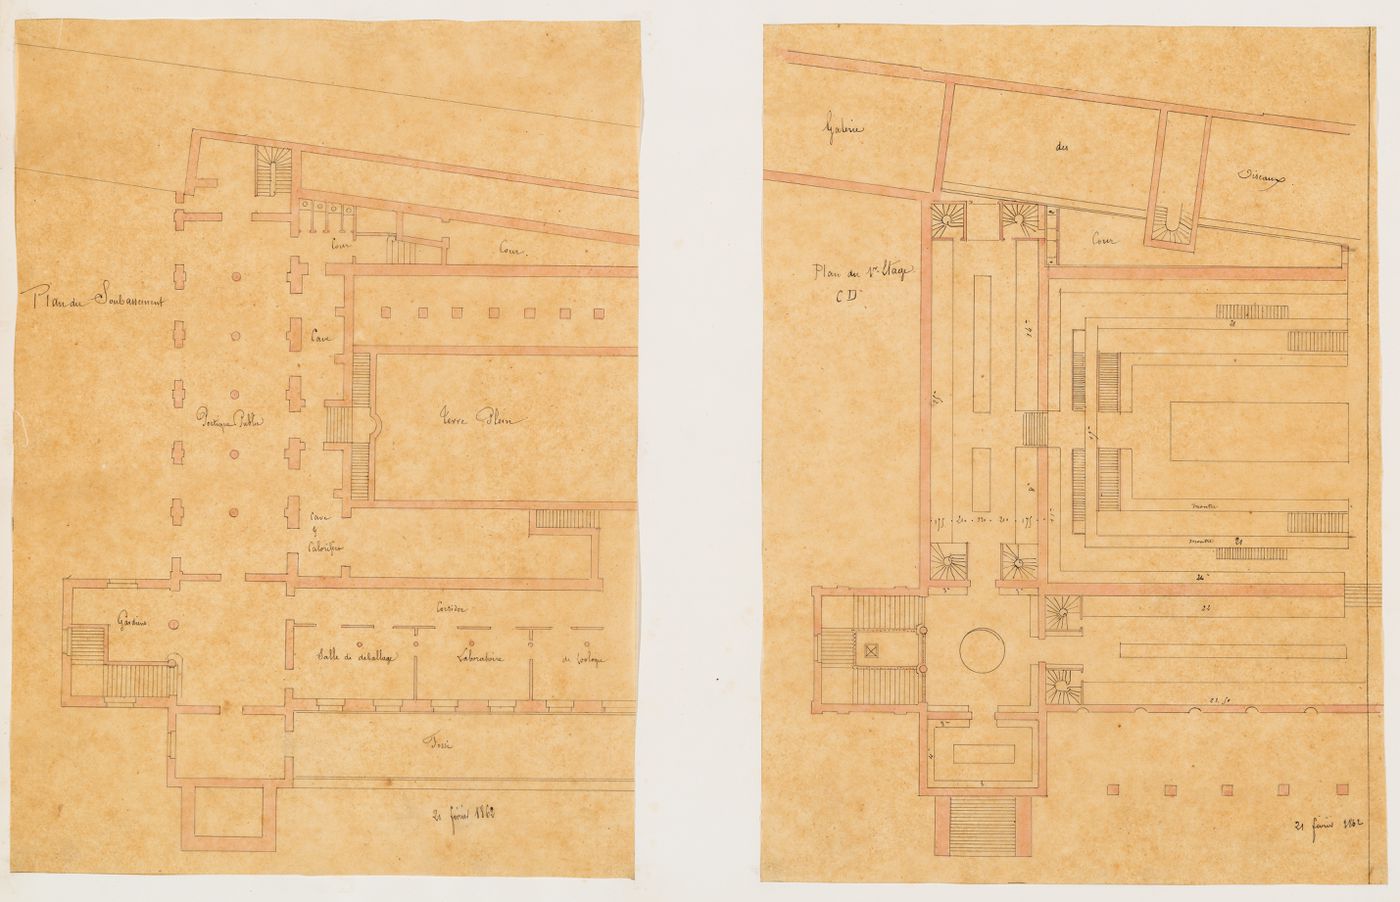 Project for a Galerie de zoologie, 1862: Partial plans for the "soubassement" and the first floor